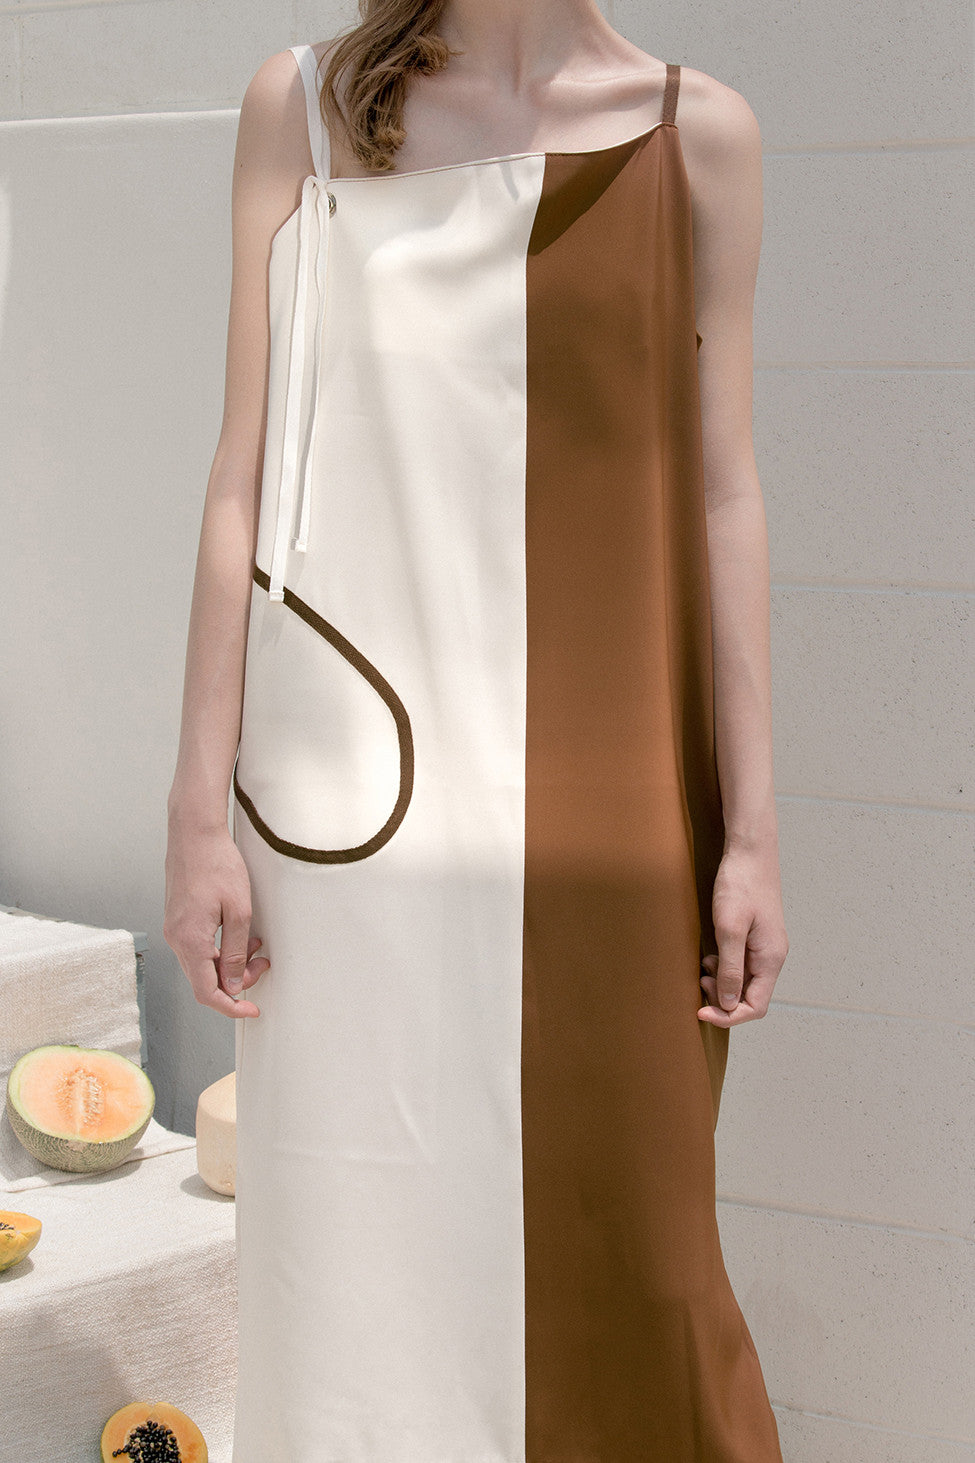 The Hayett dress in asymmetric neckline with thin shoulder strap and side slits. Pull on. 